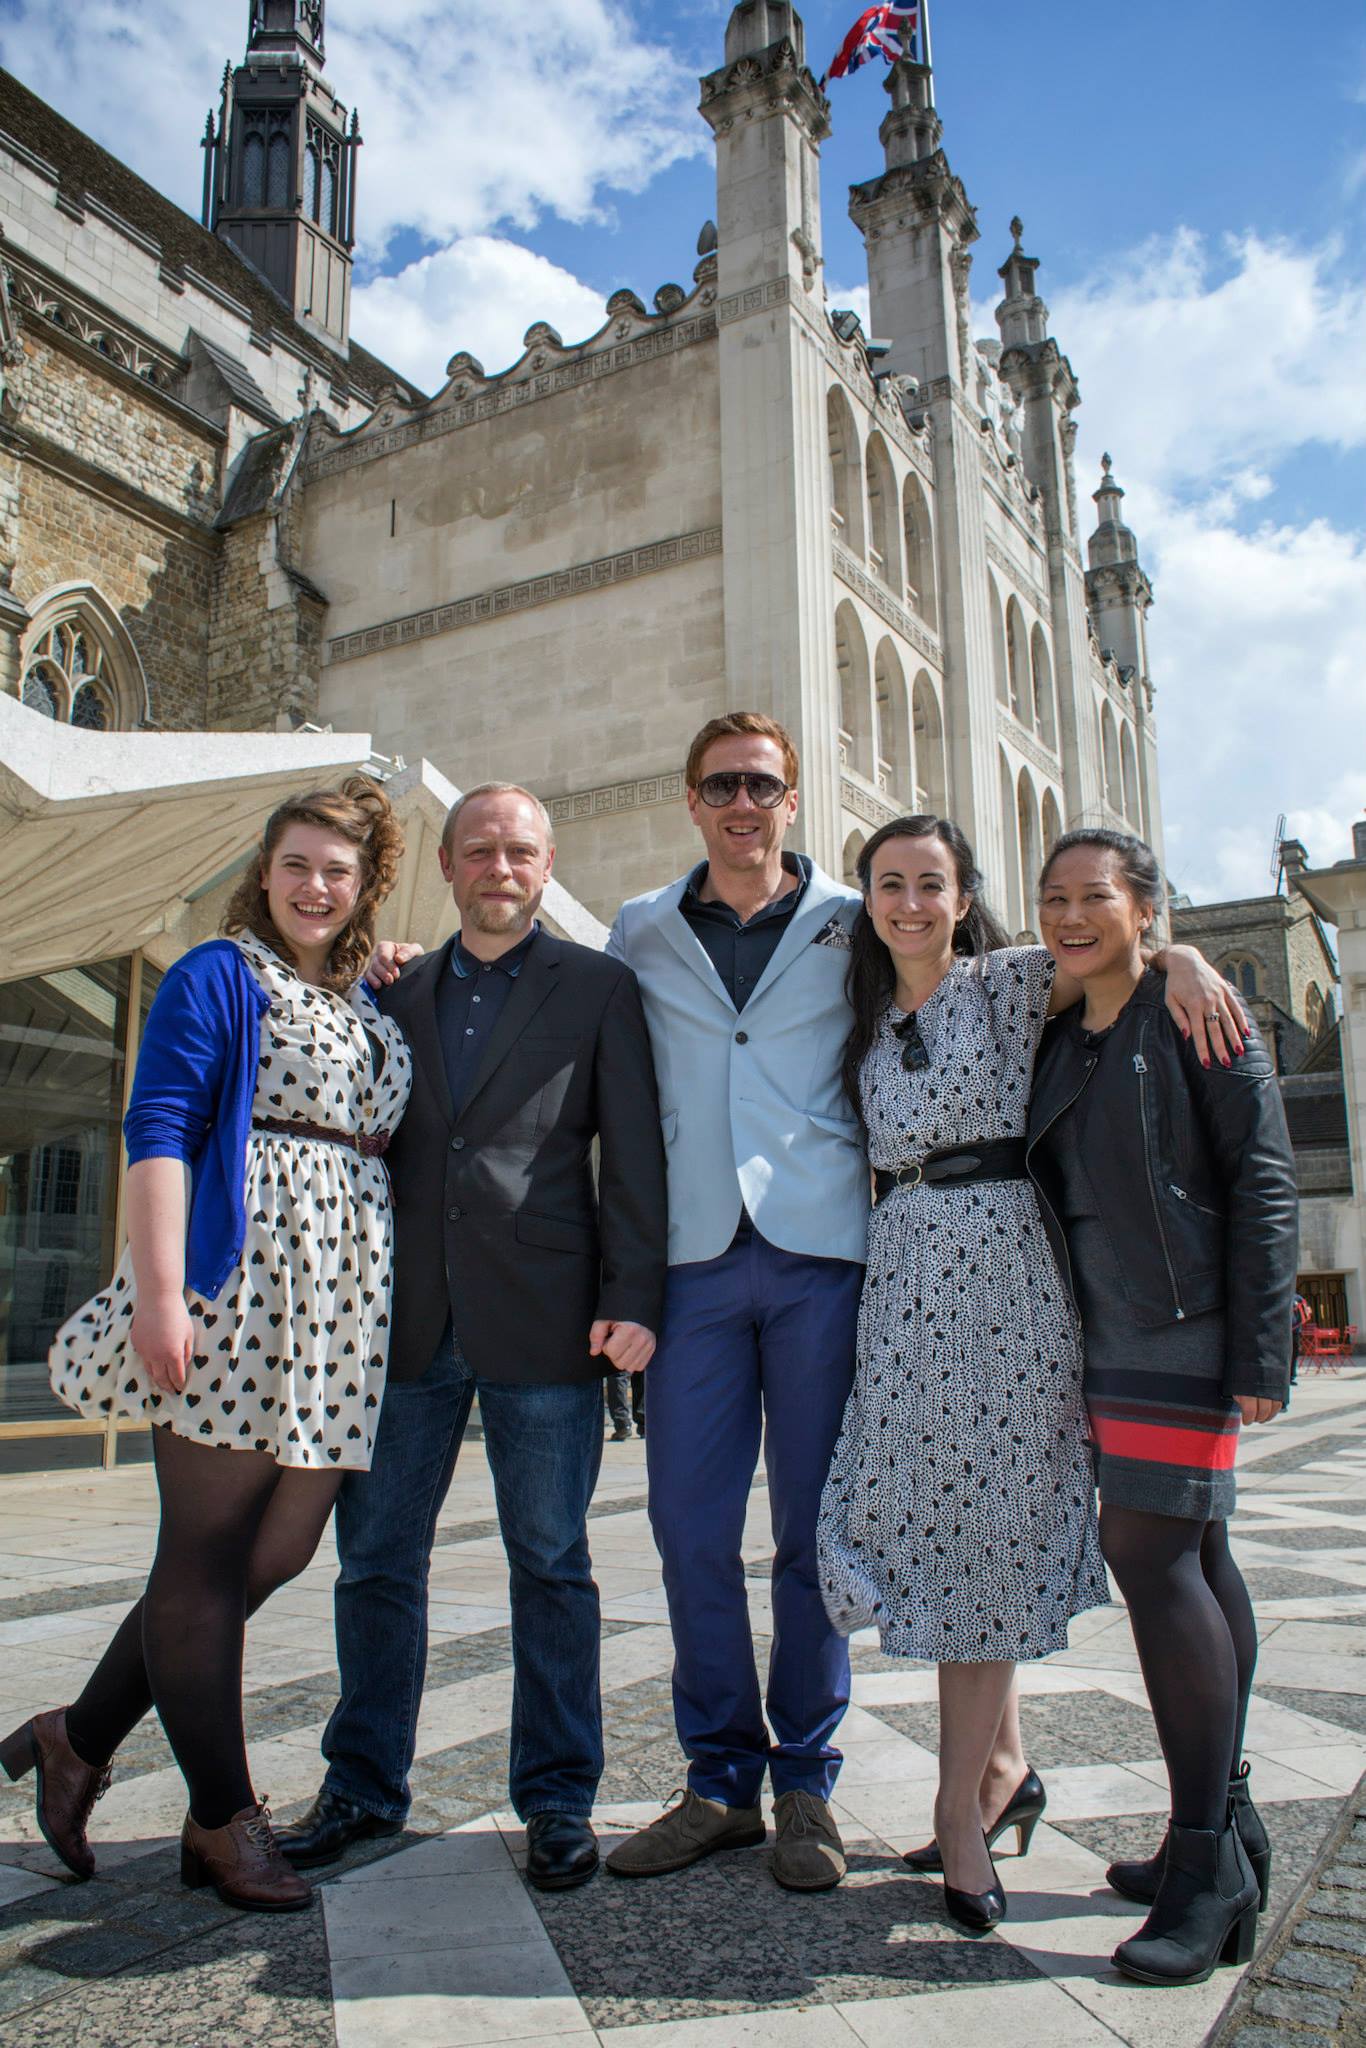 Siobhan Daly, Damian Lewis and the Grassroots Shakespeare London team celebrating Shakespeare's 450th birthday at London's Guildhall.